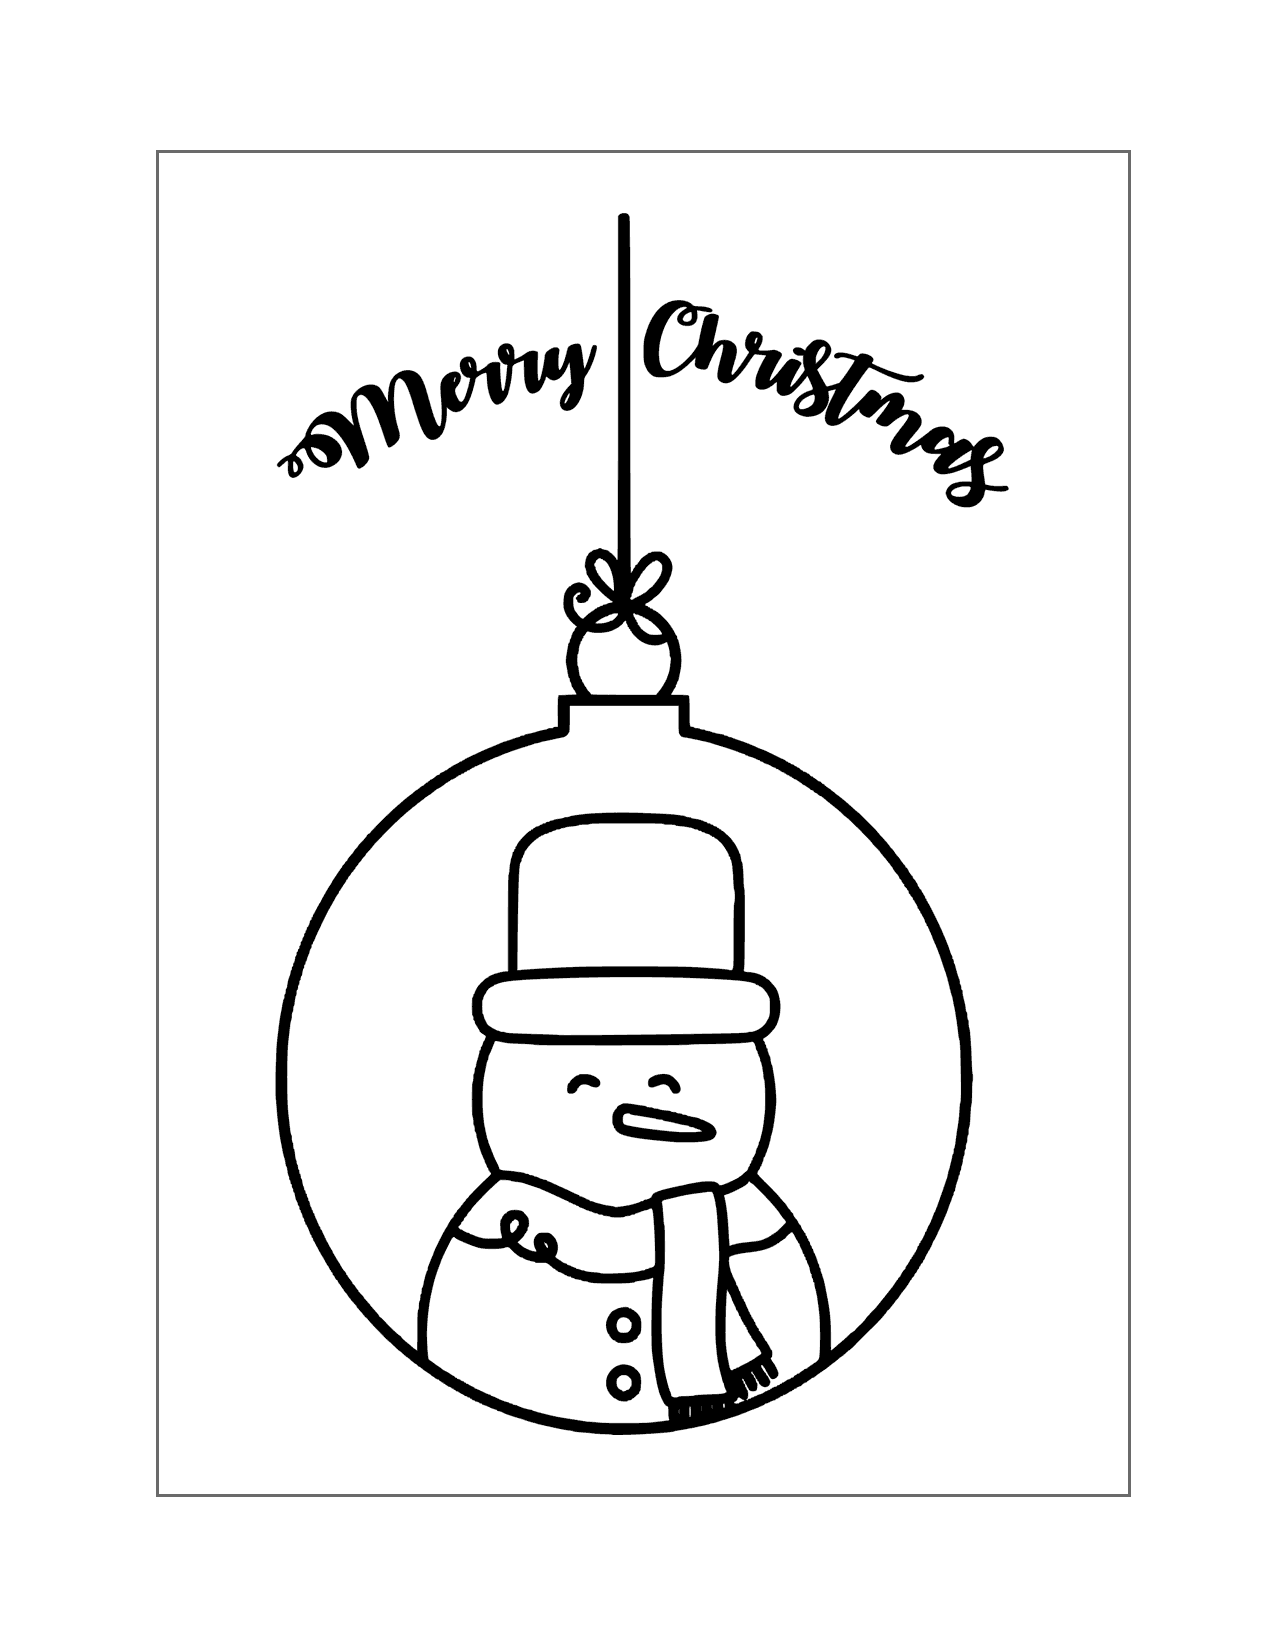 Cute Christmas Snowman Ornament Coloring Page